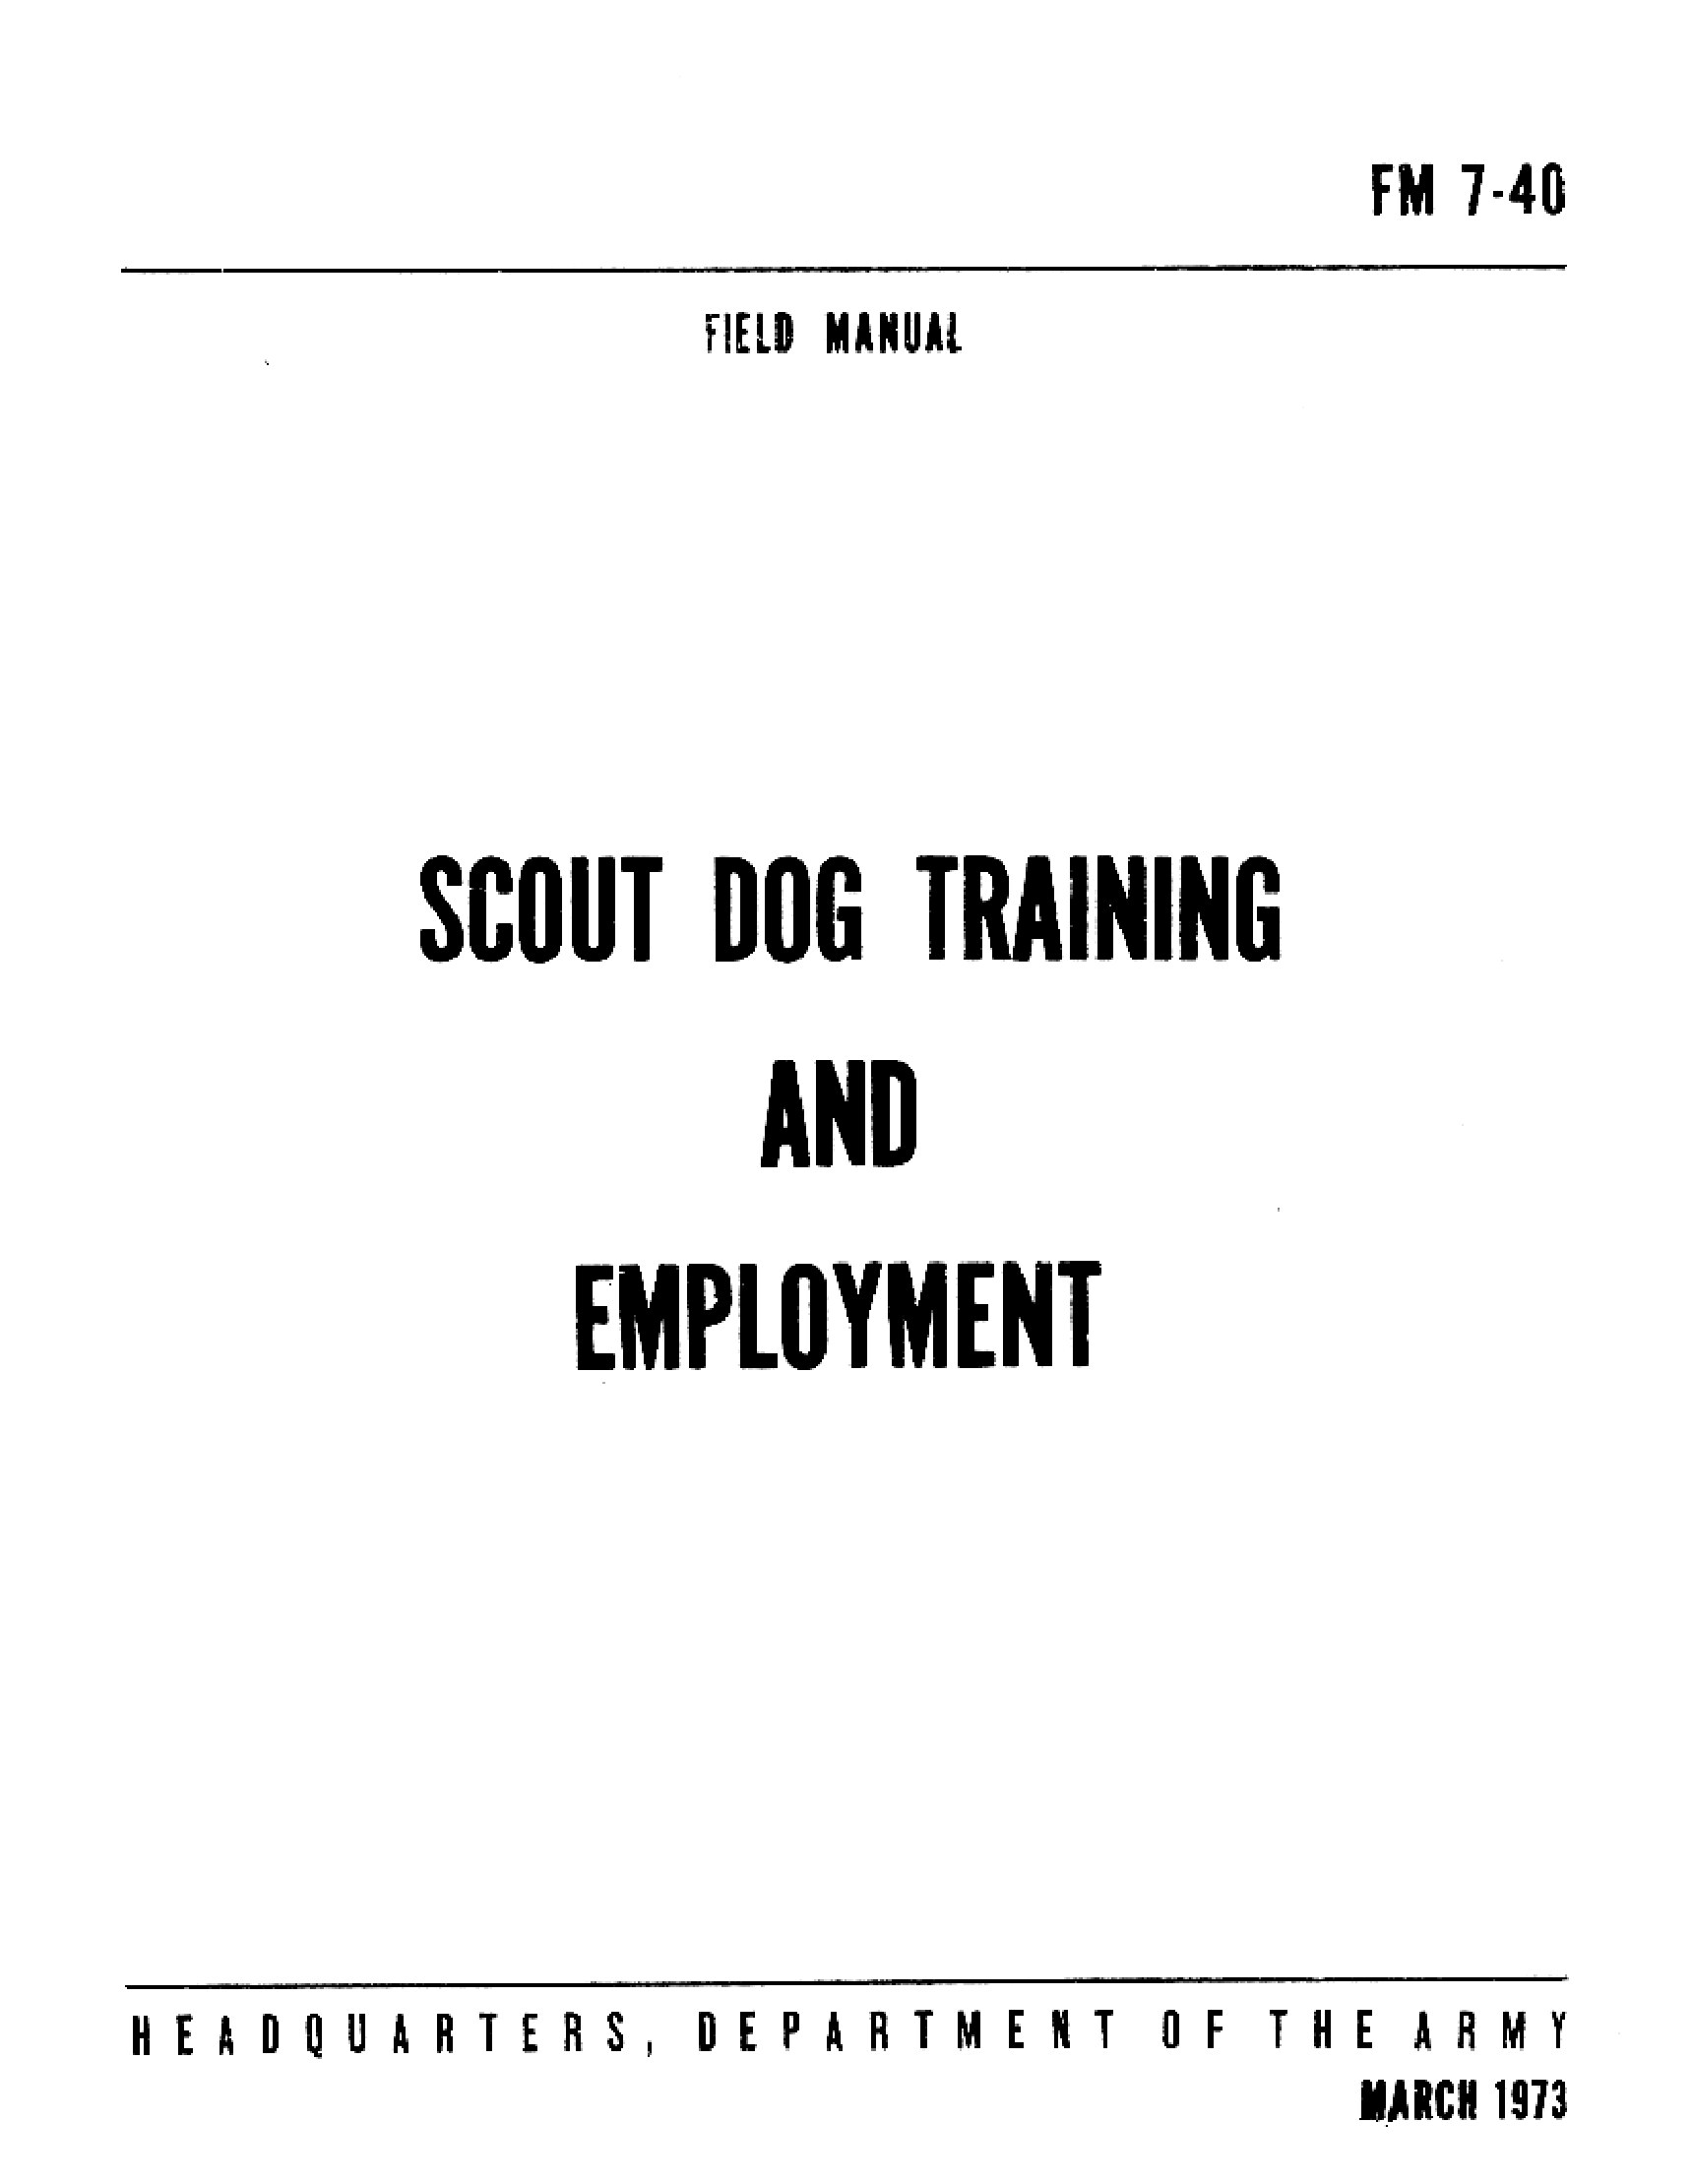 FM 7-40 Scout Dog Training and Employment 1973